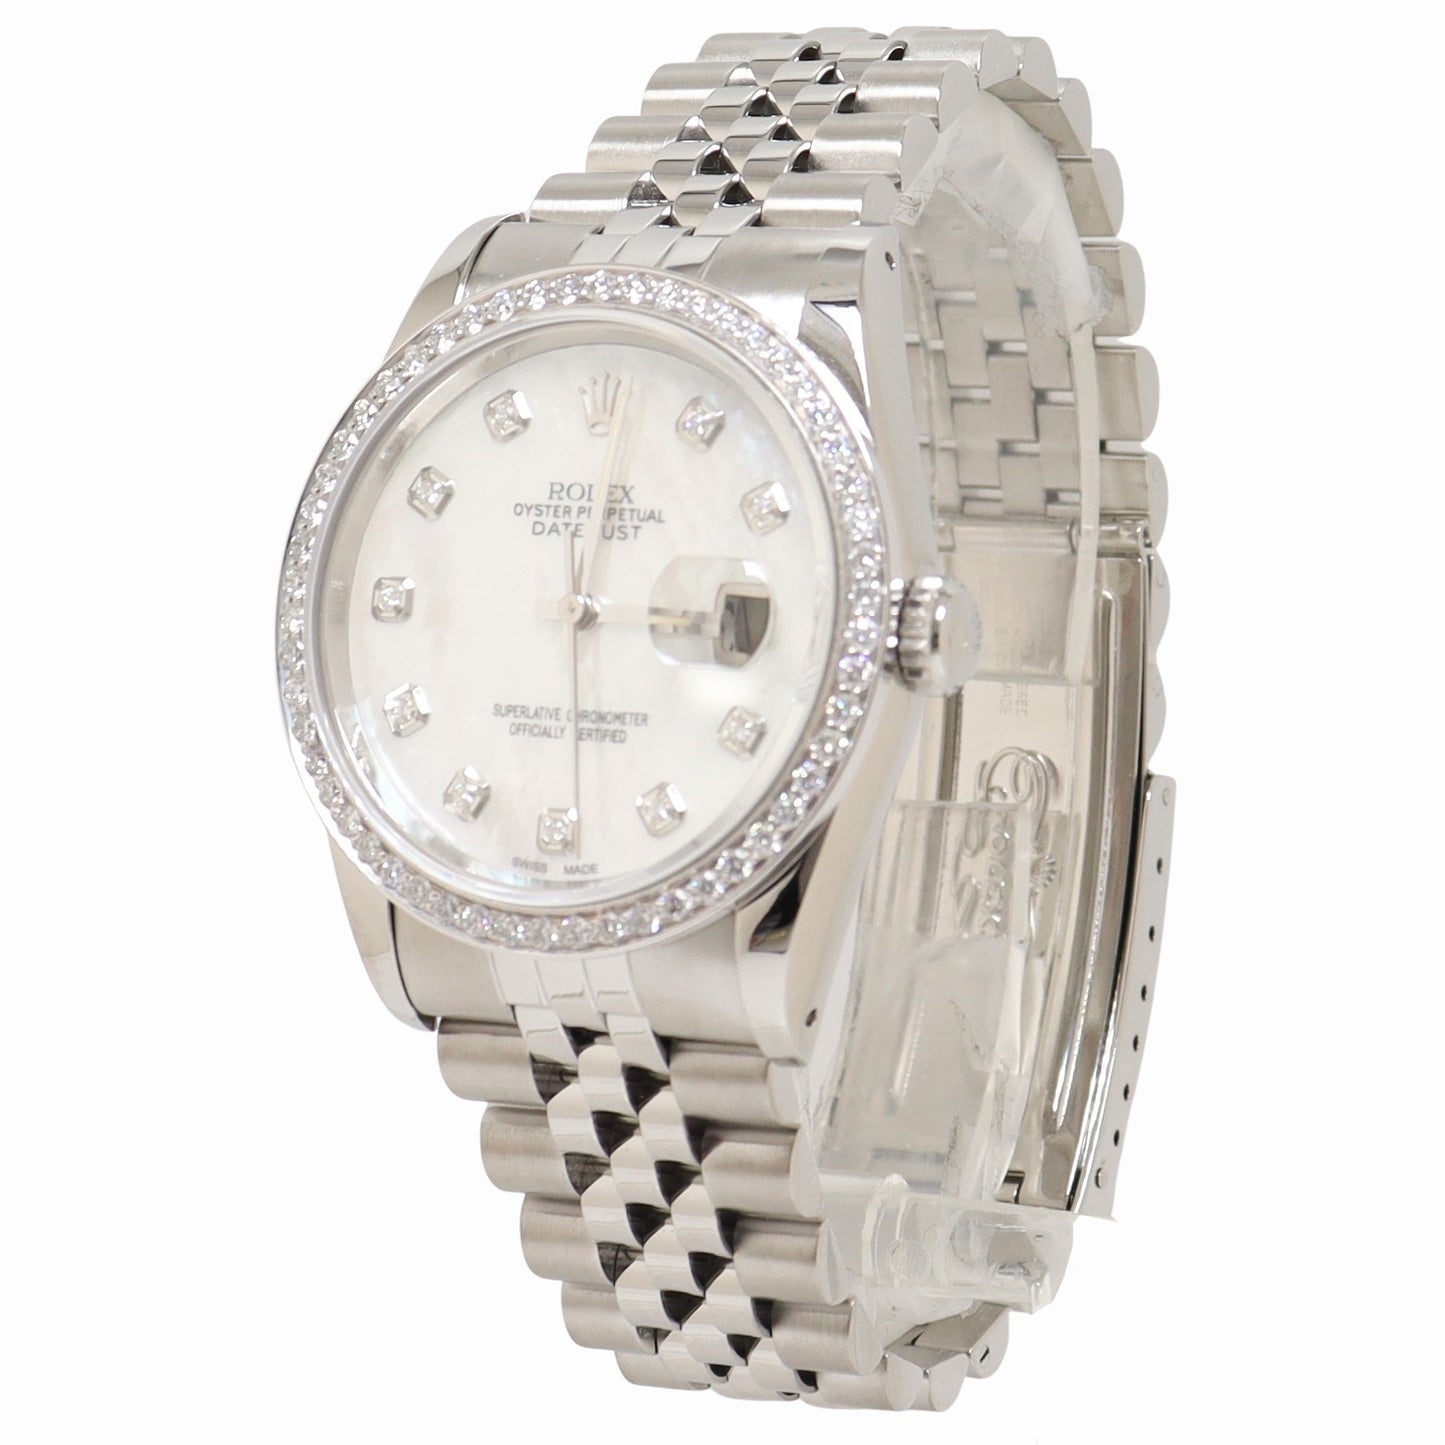 Rolex Datejust Stainless Steel 36mm Custom White MOP Diamond Dial Watch Reference# 16234